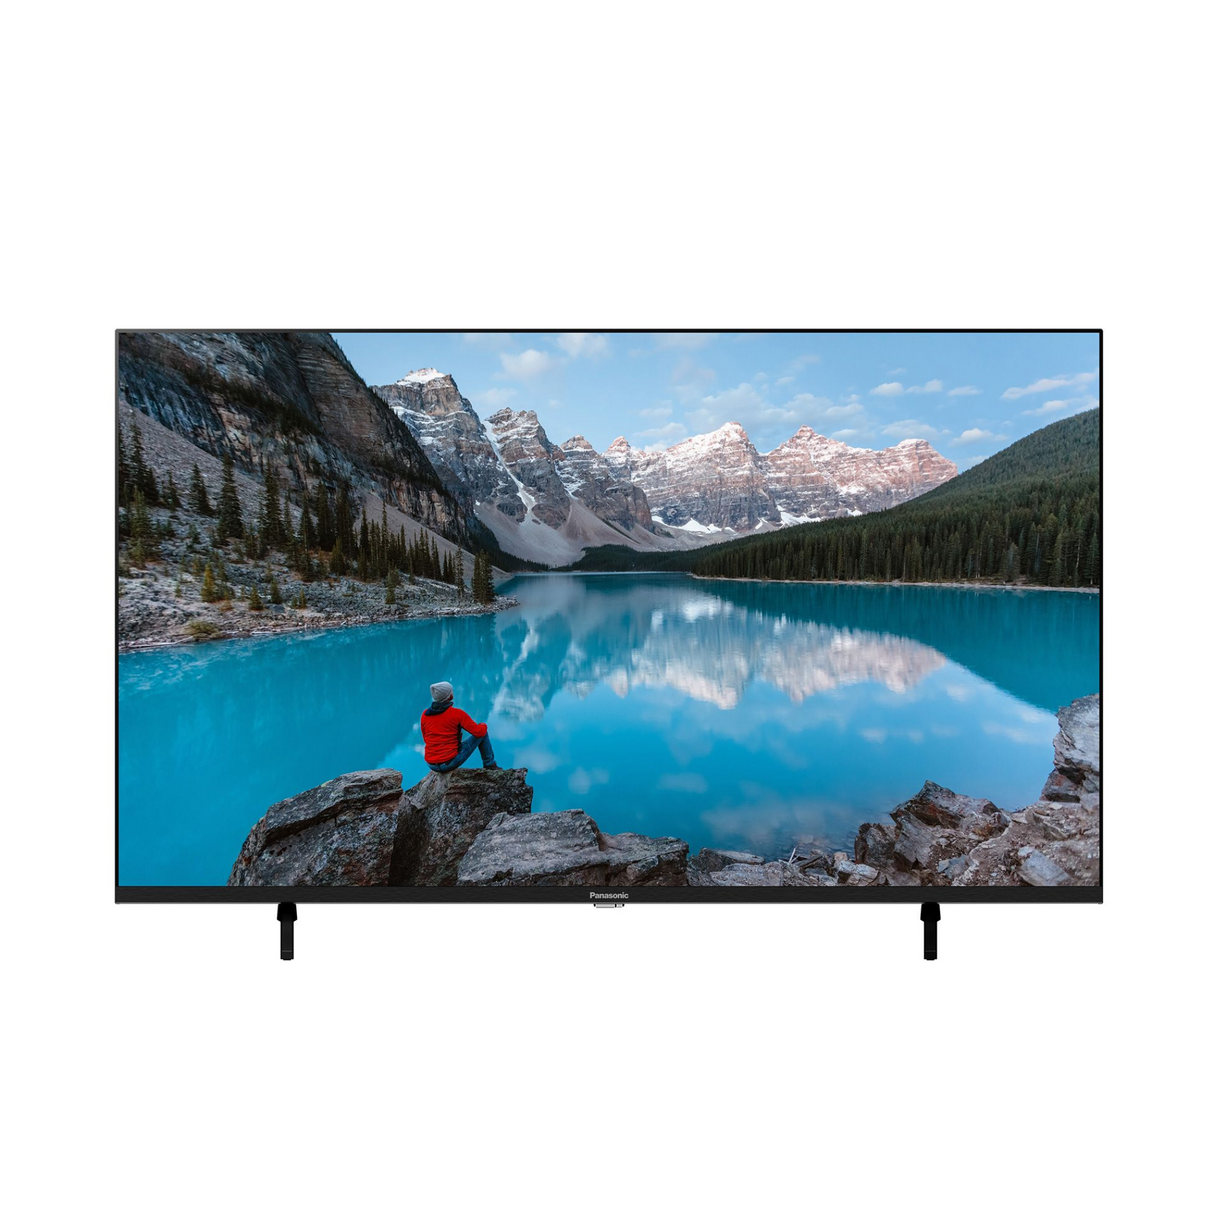 Panasonic TX55MX800B 55 inch HDR 4K Ultra HD Smart LED TV with Freeview Play